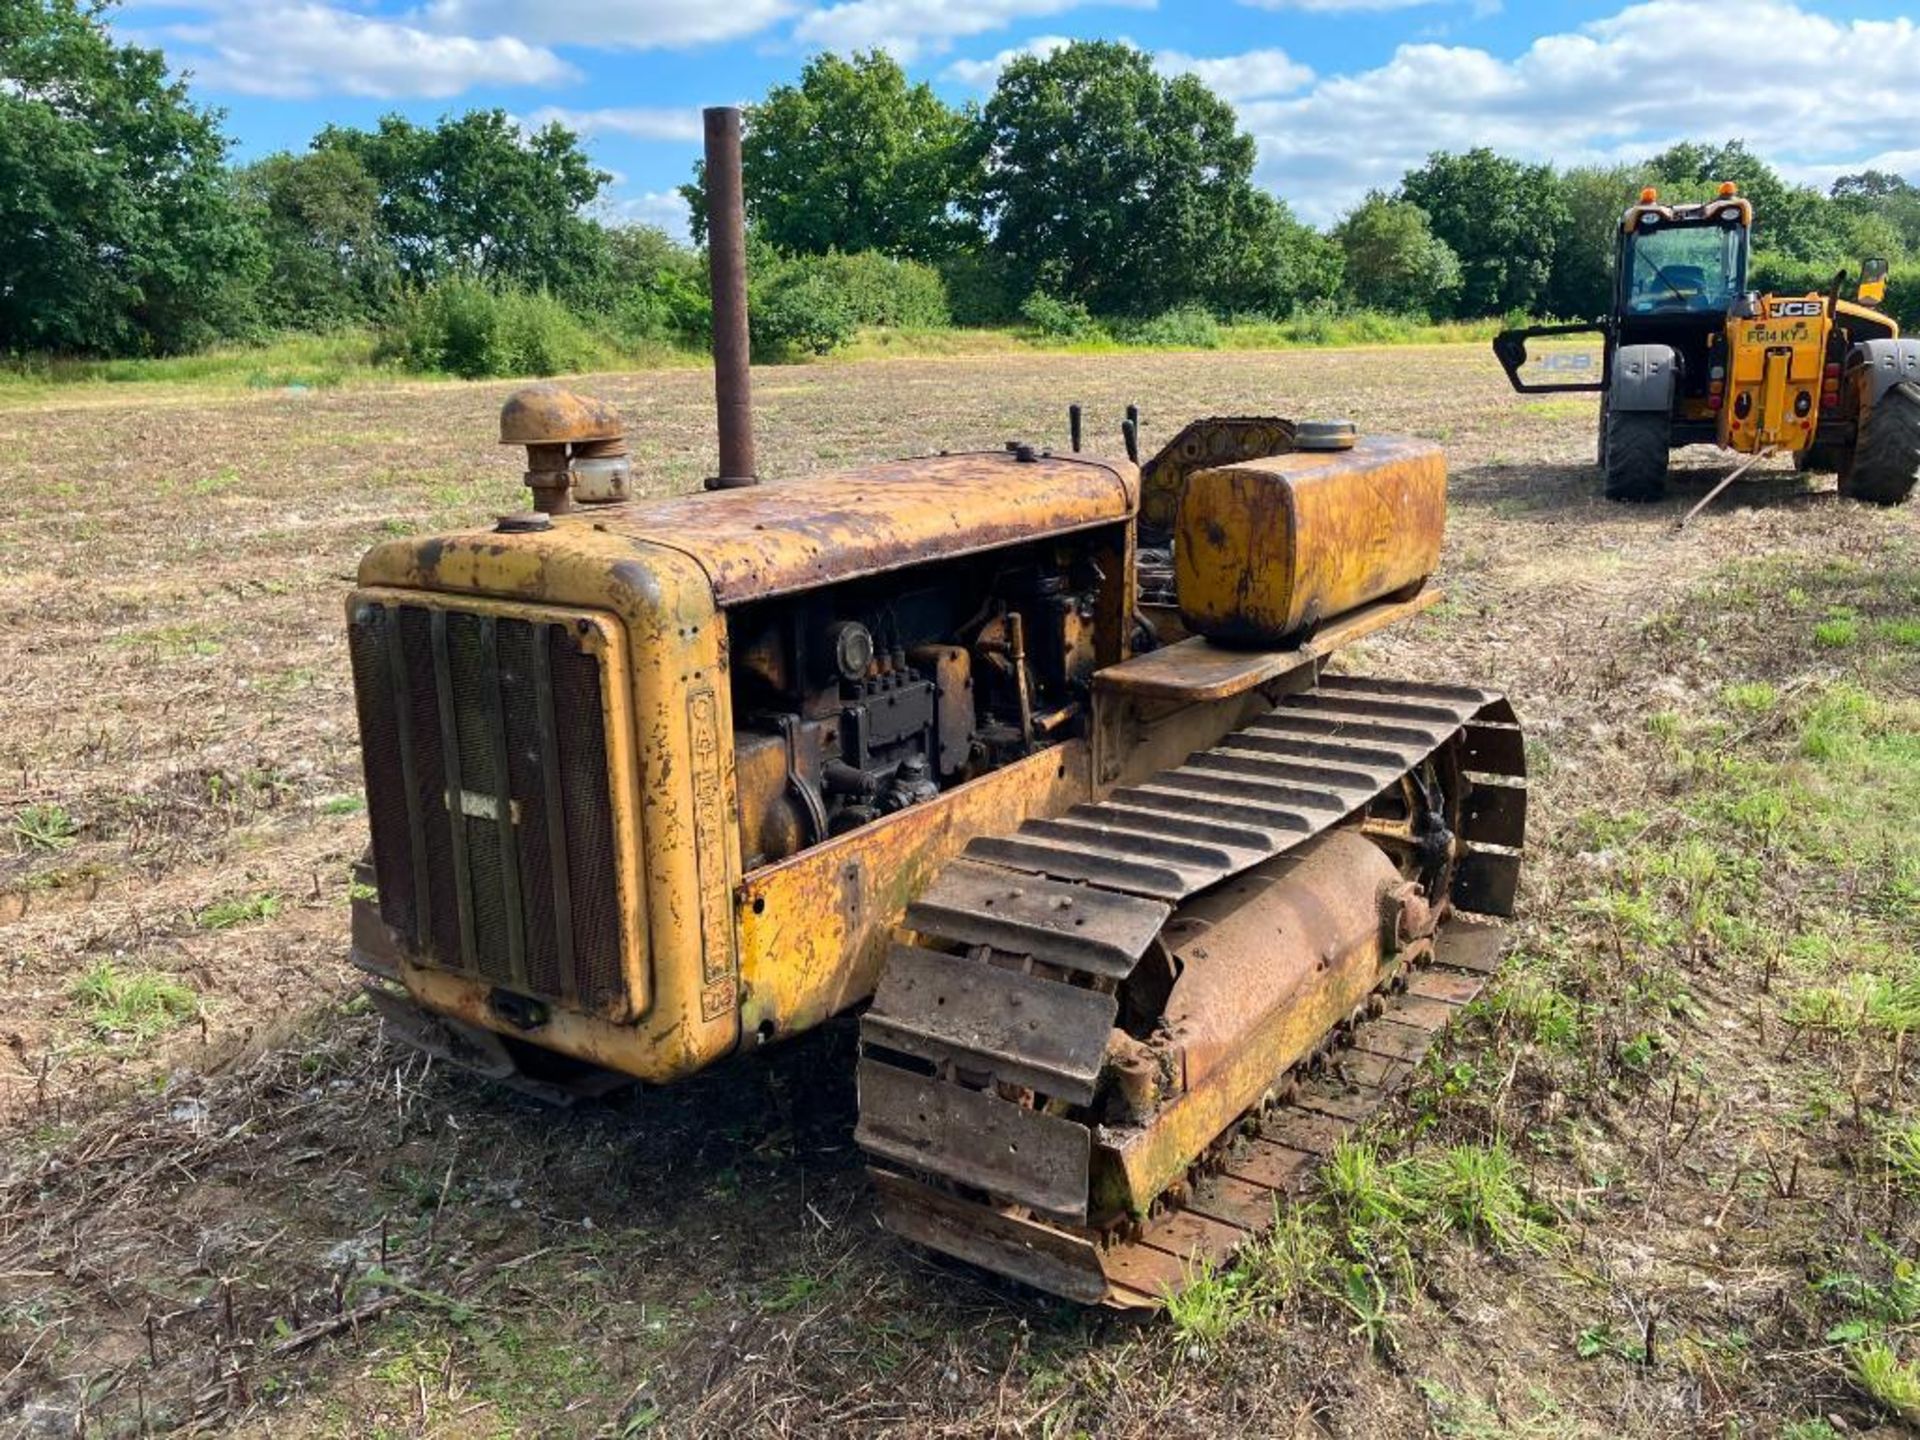 1941 Caterpillar D2 metal tracked crawler with 16" tracks, rear swinging drawbar and belt pulley. Ho - Image 10 of 15